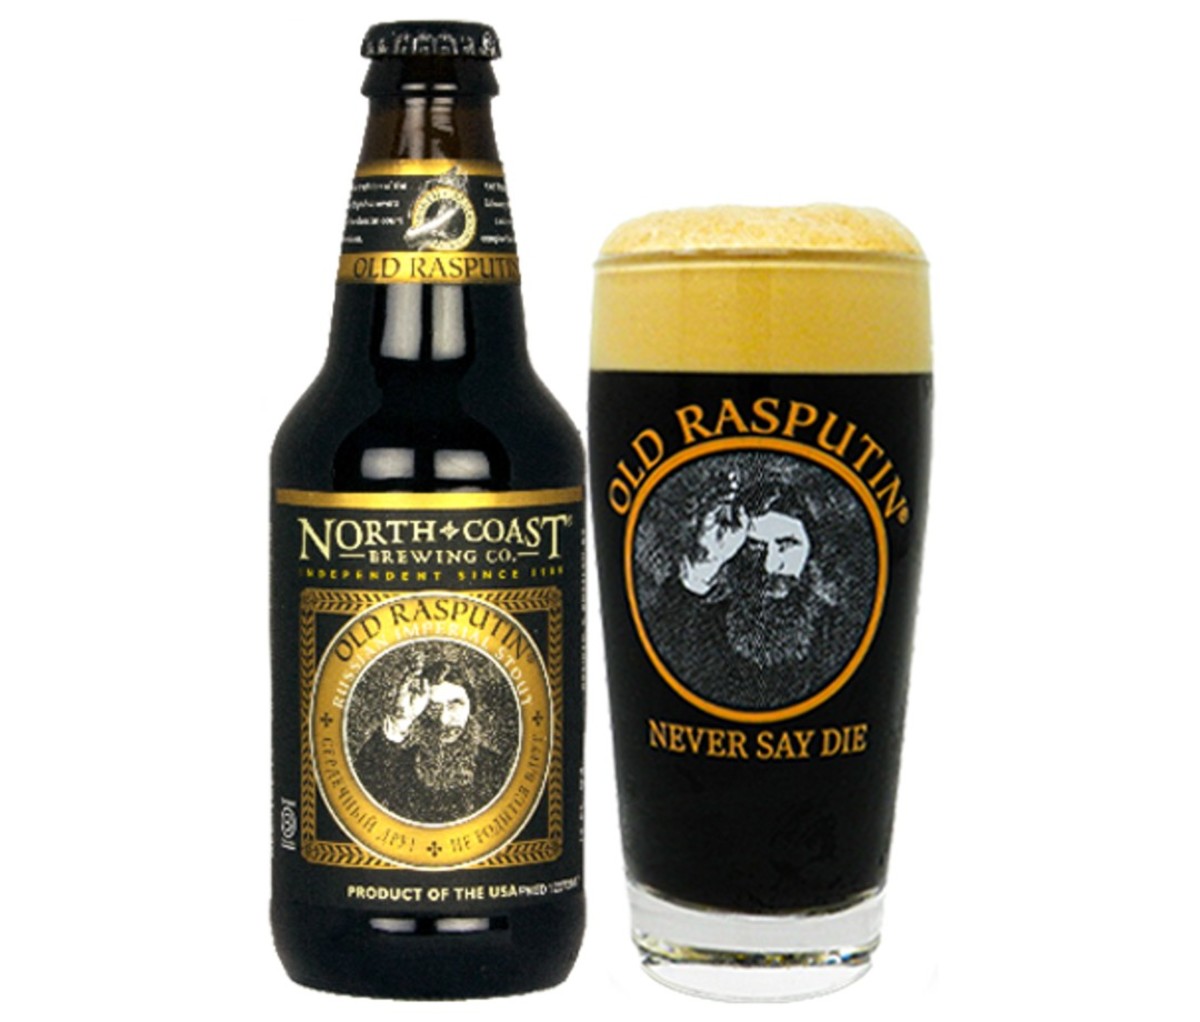 A bottle and a glass of North Coast Old Rasputin